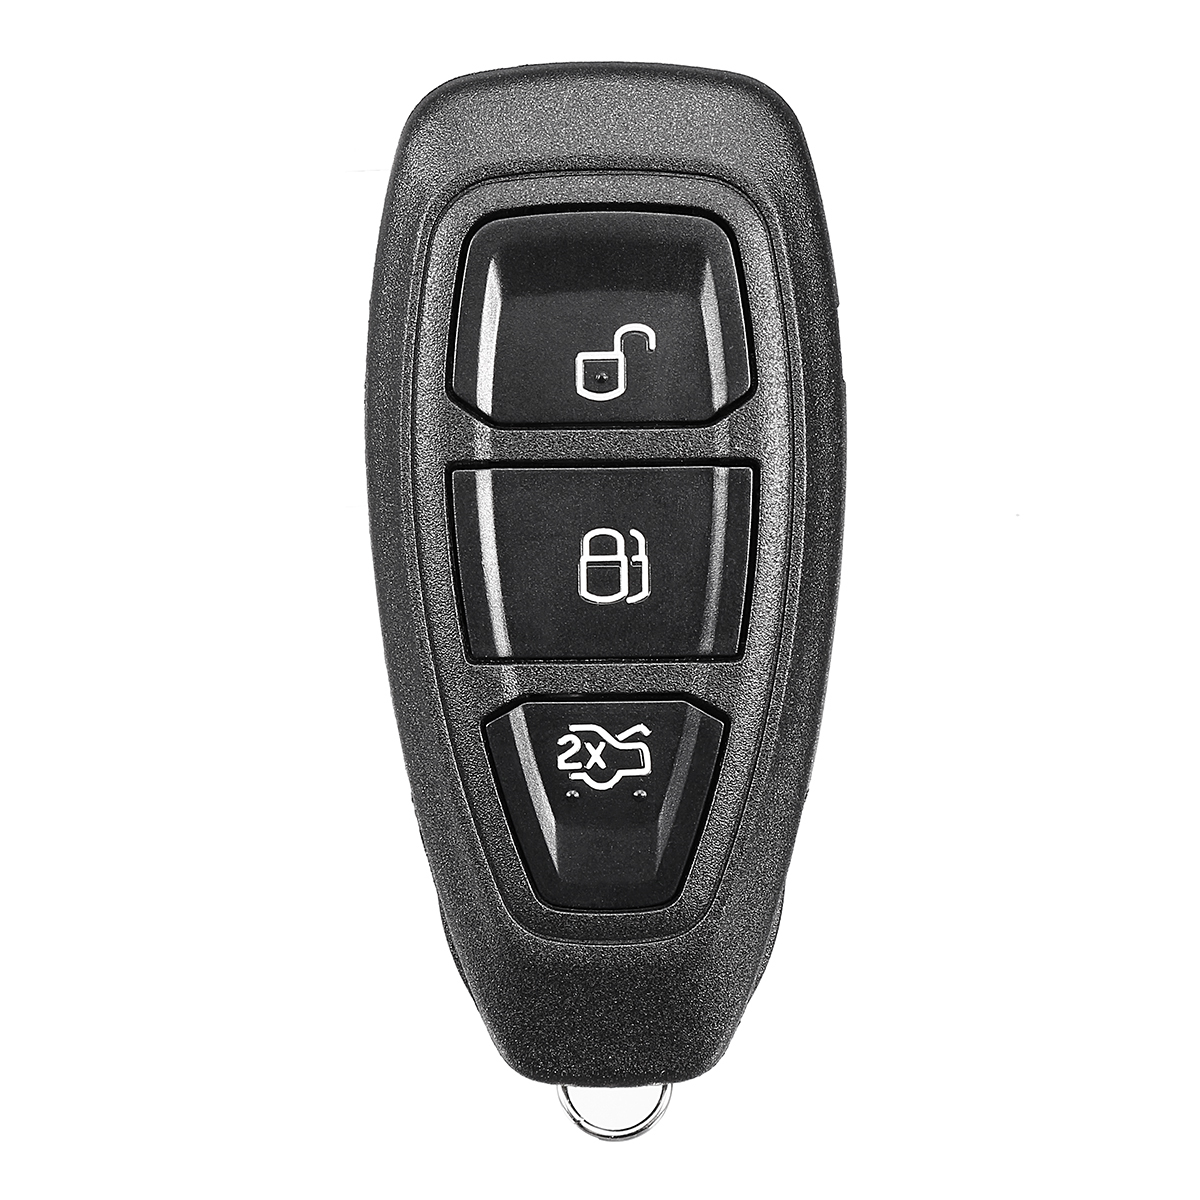 3 Buttons Remote Key Fob 433MHz Replacement for Ford B-Max C-Max #KR55WK48801 2